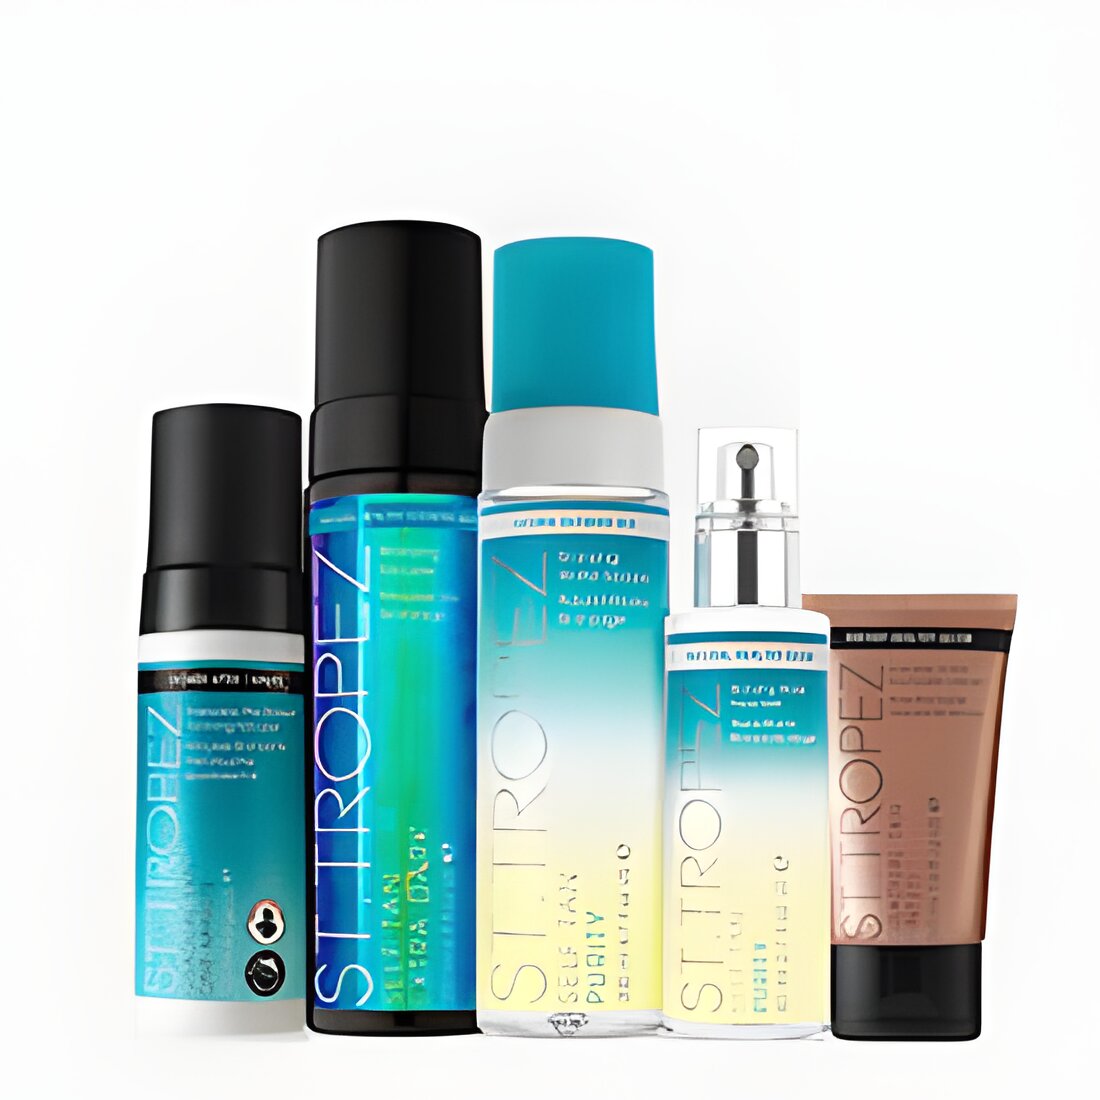 Free St.Tropez Skincare Products For Testers